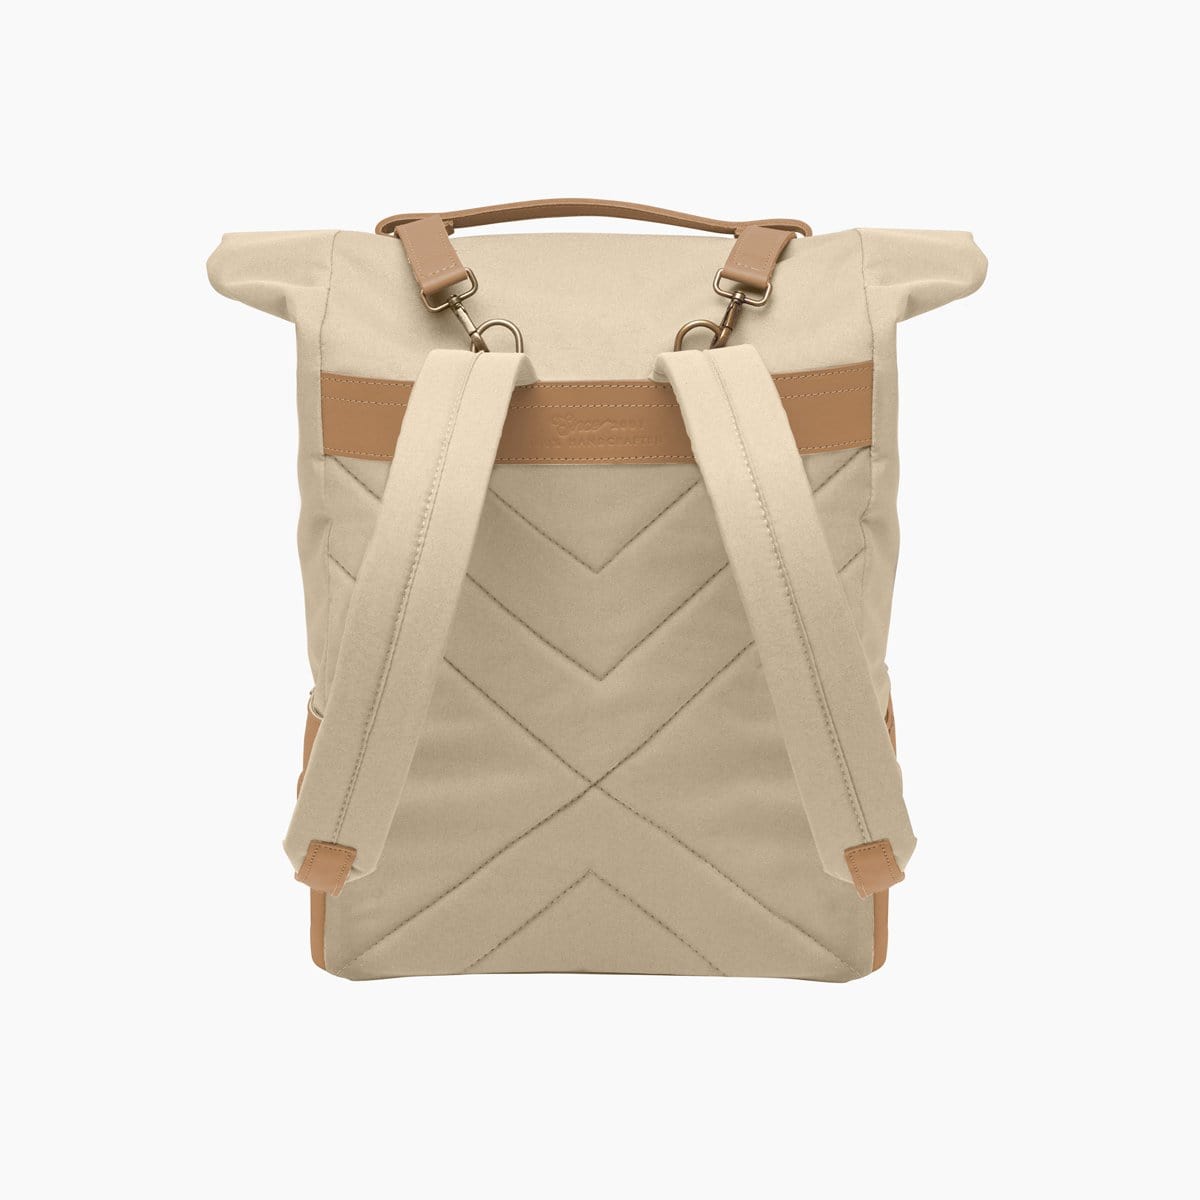 Beatnik & Sons Leather backpacks the Terry backpack